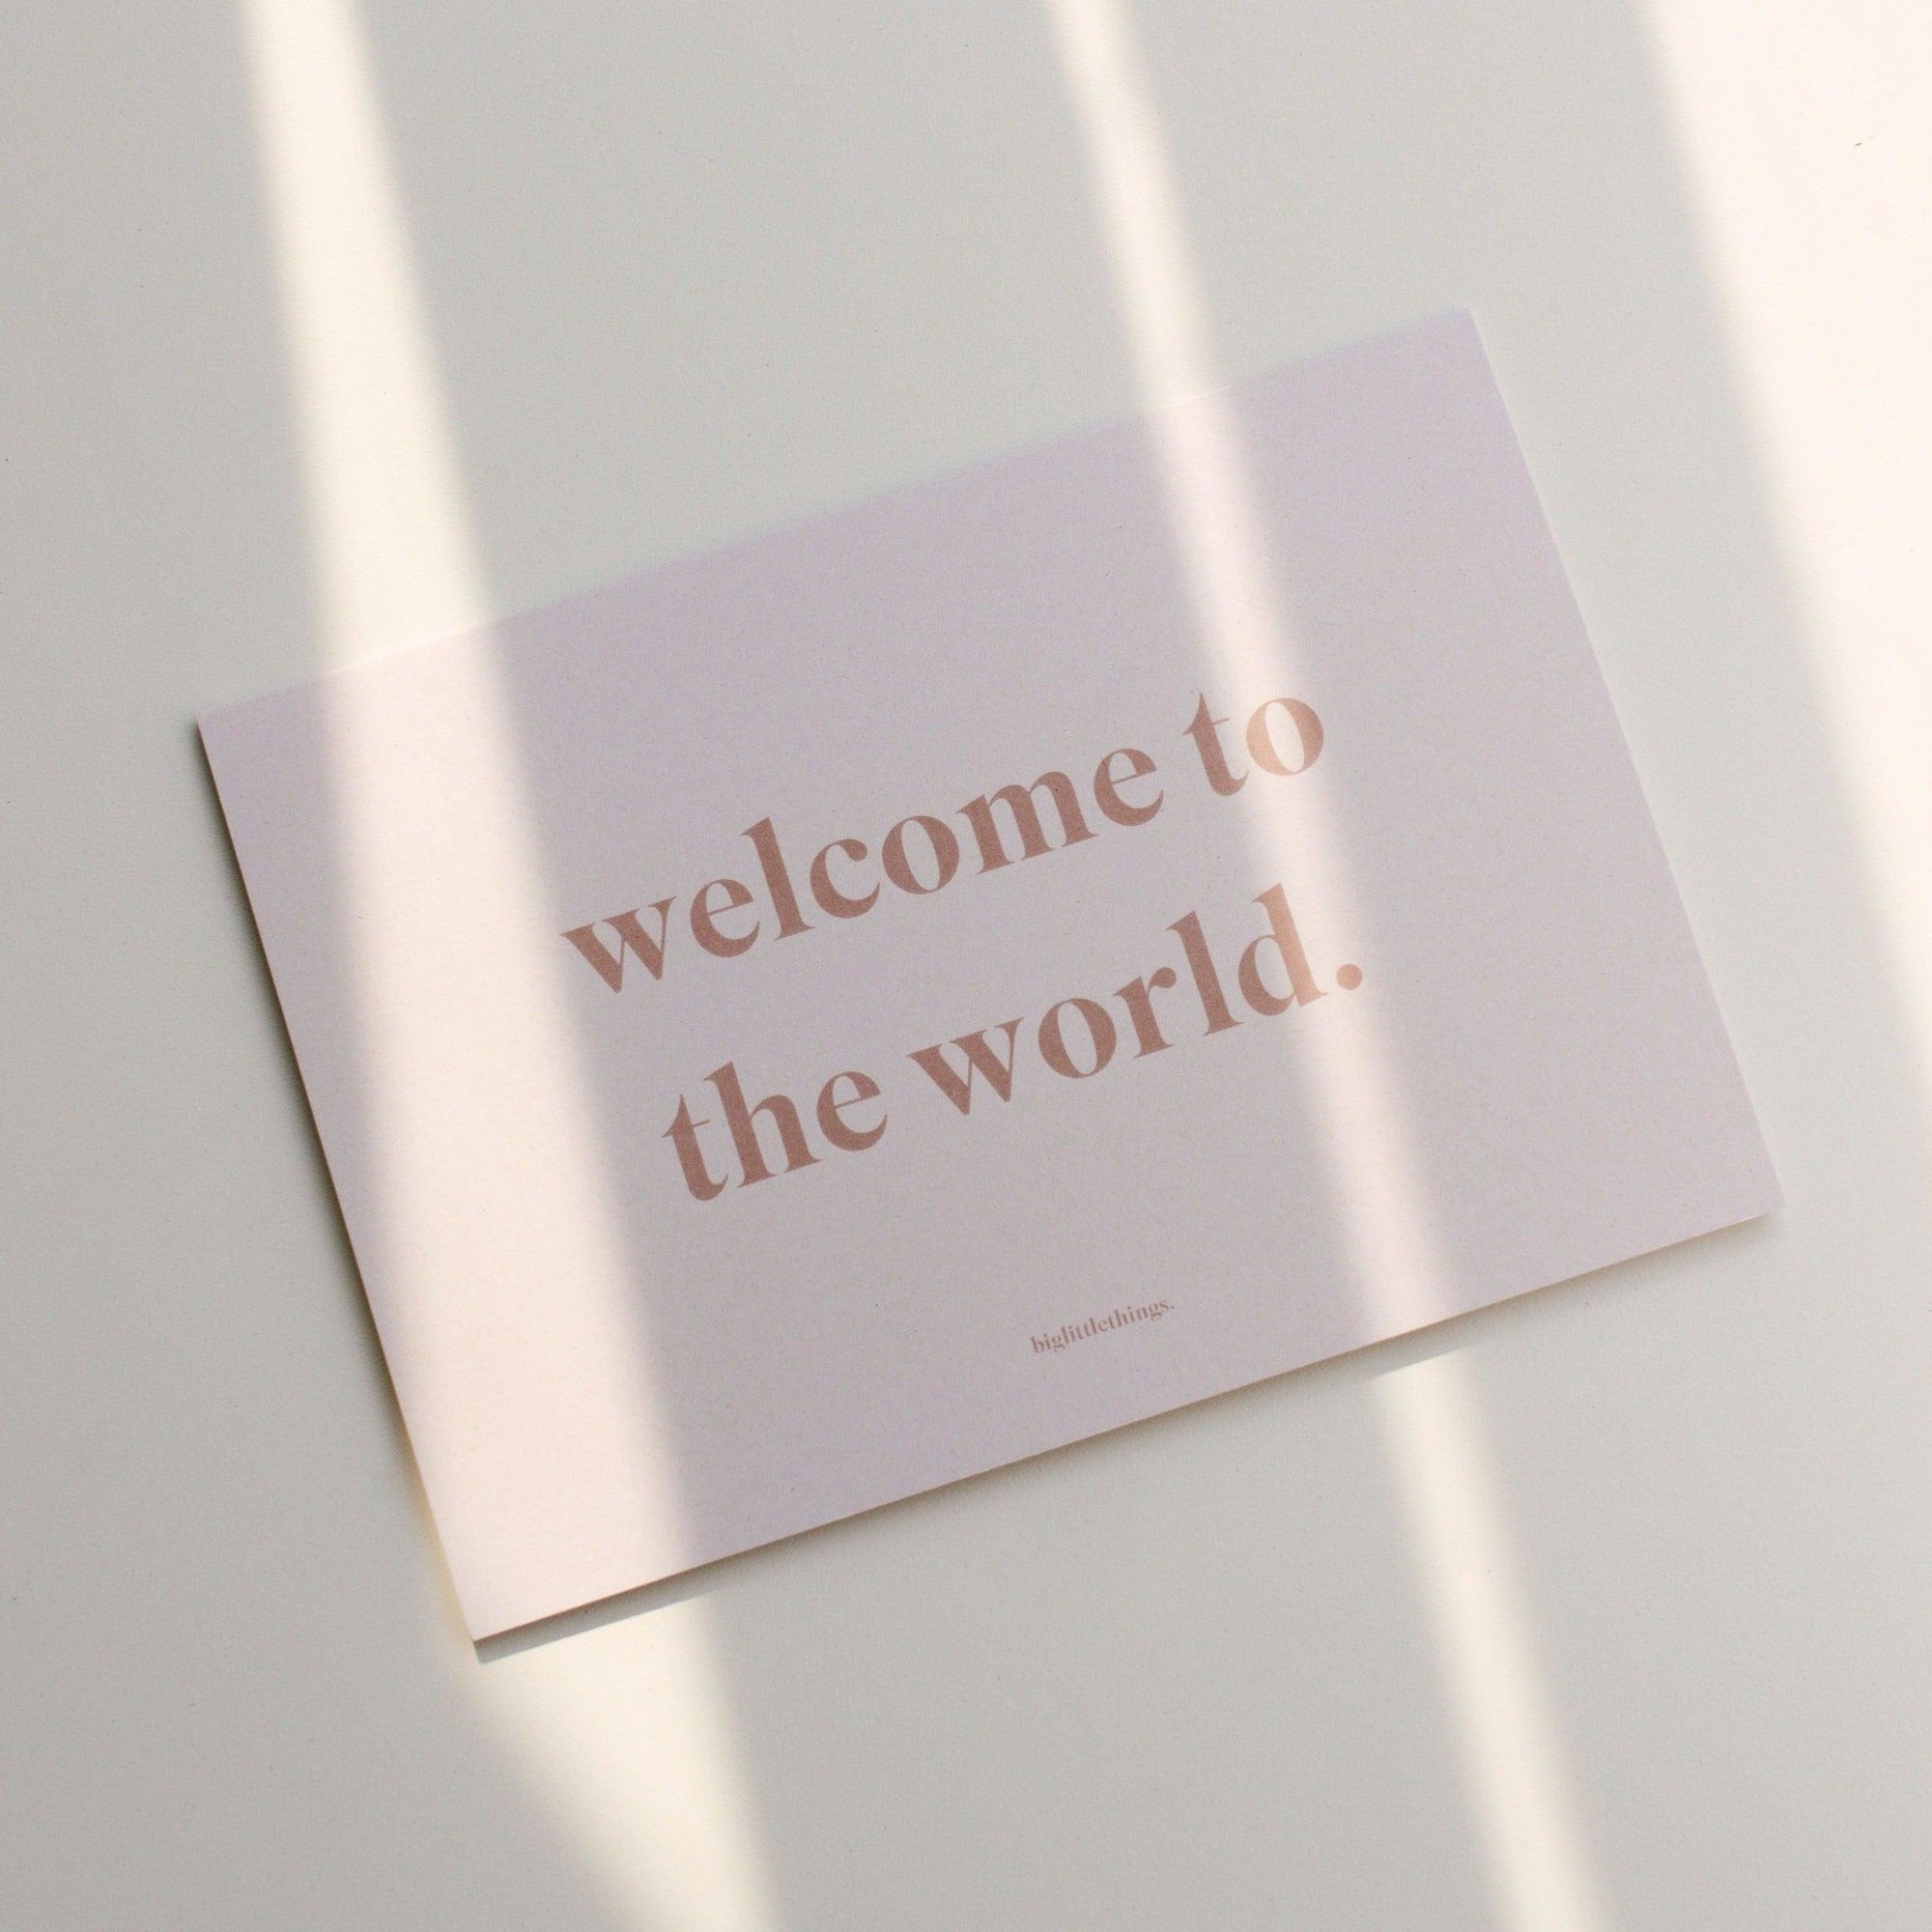 Welcome to the world of greeting cards. Explore our virtual shelves filled with an array of unique send a gift voucher and beautiful biglittlethings cards.